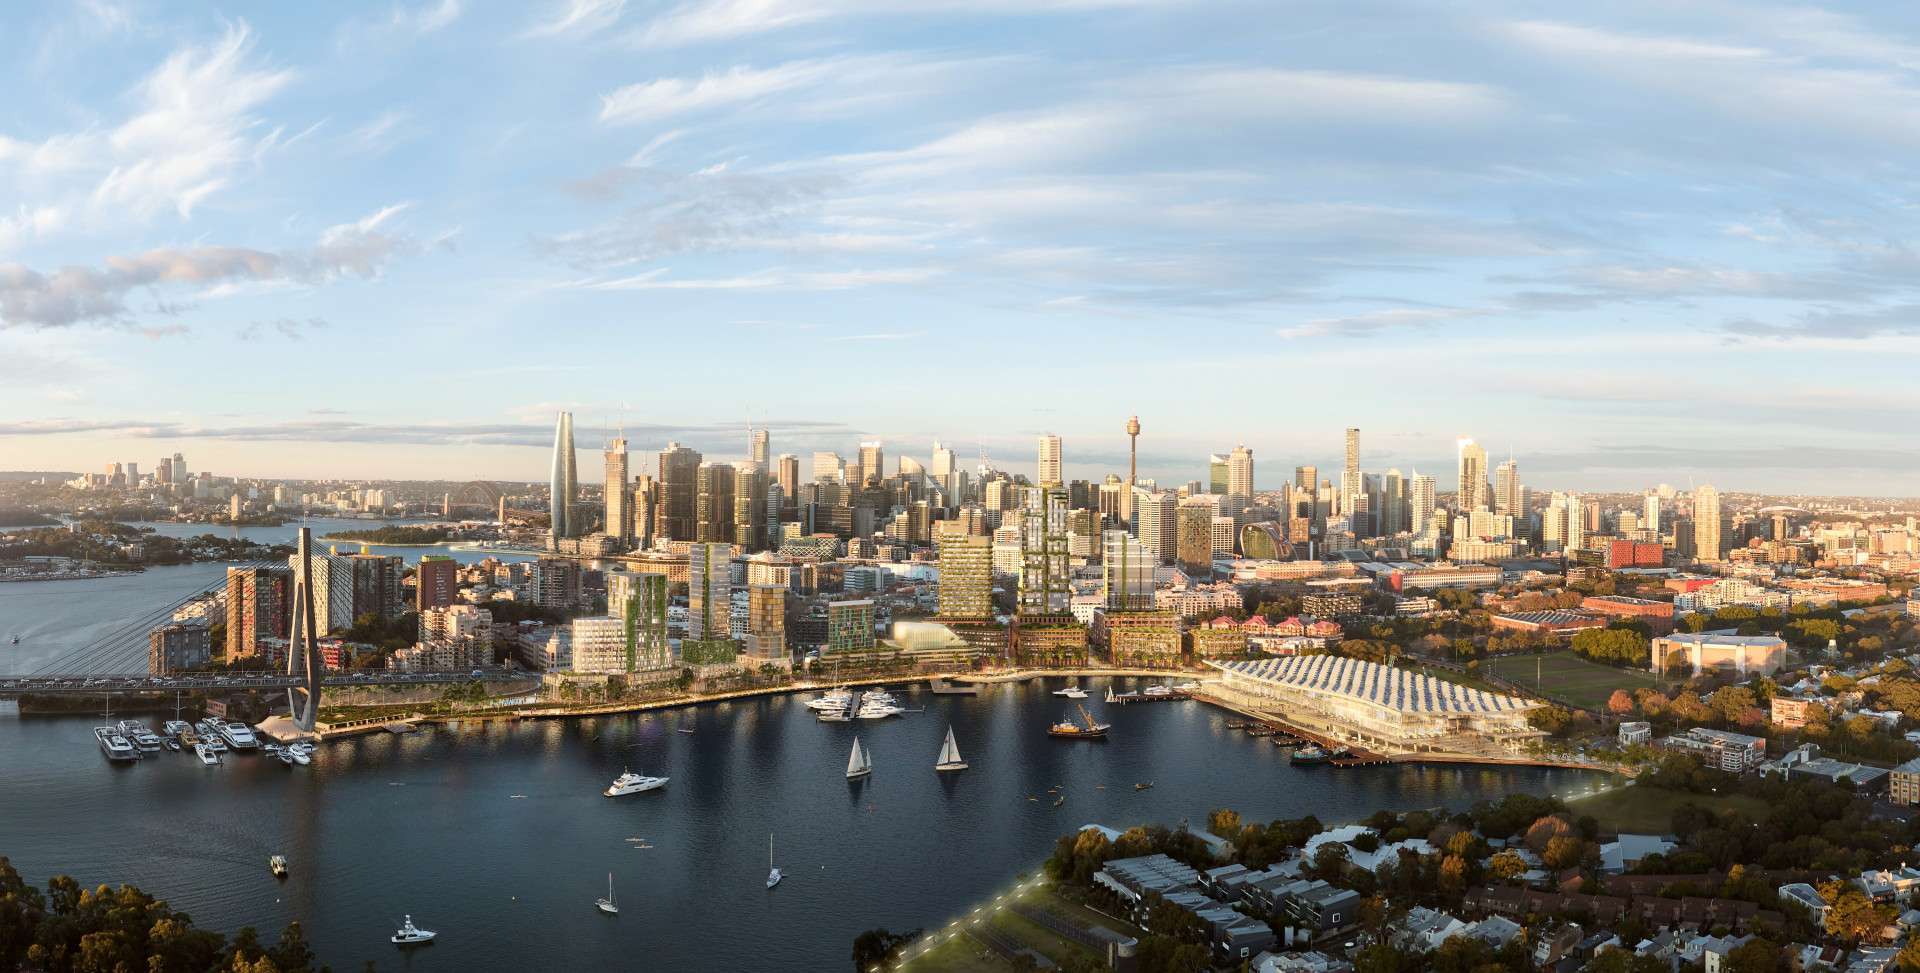 “The last piece of the Blackwattle Bay puzzle”: NSW Government to add 300 new homes